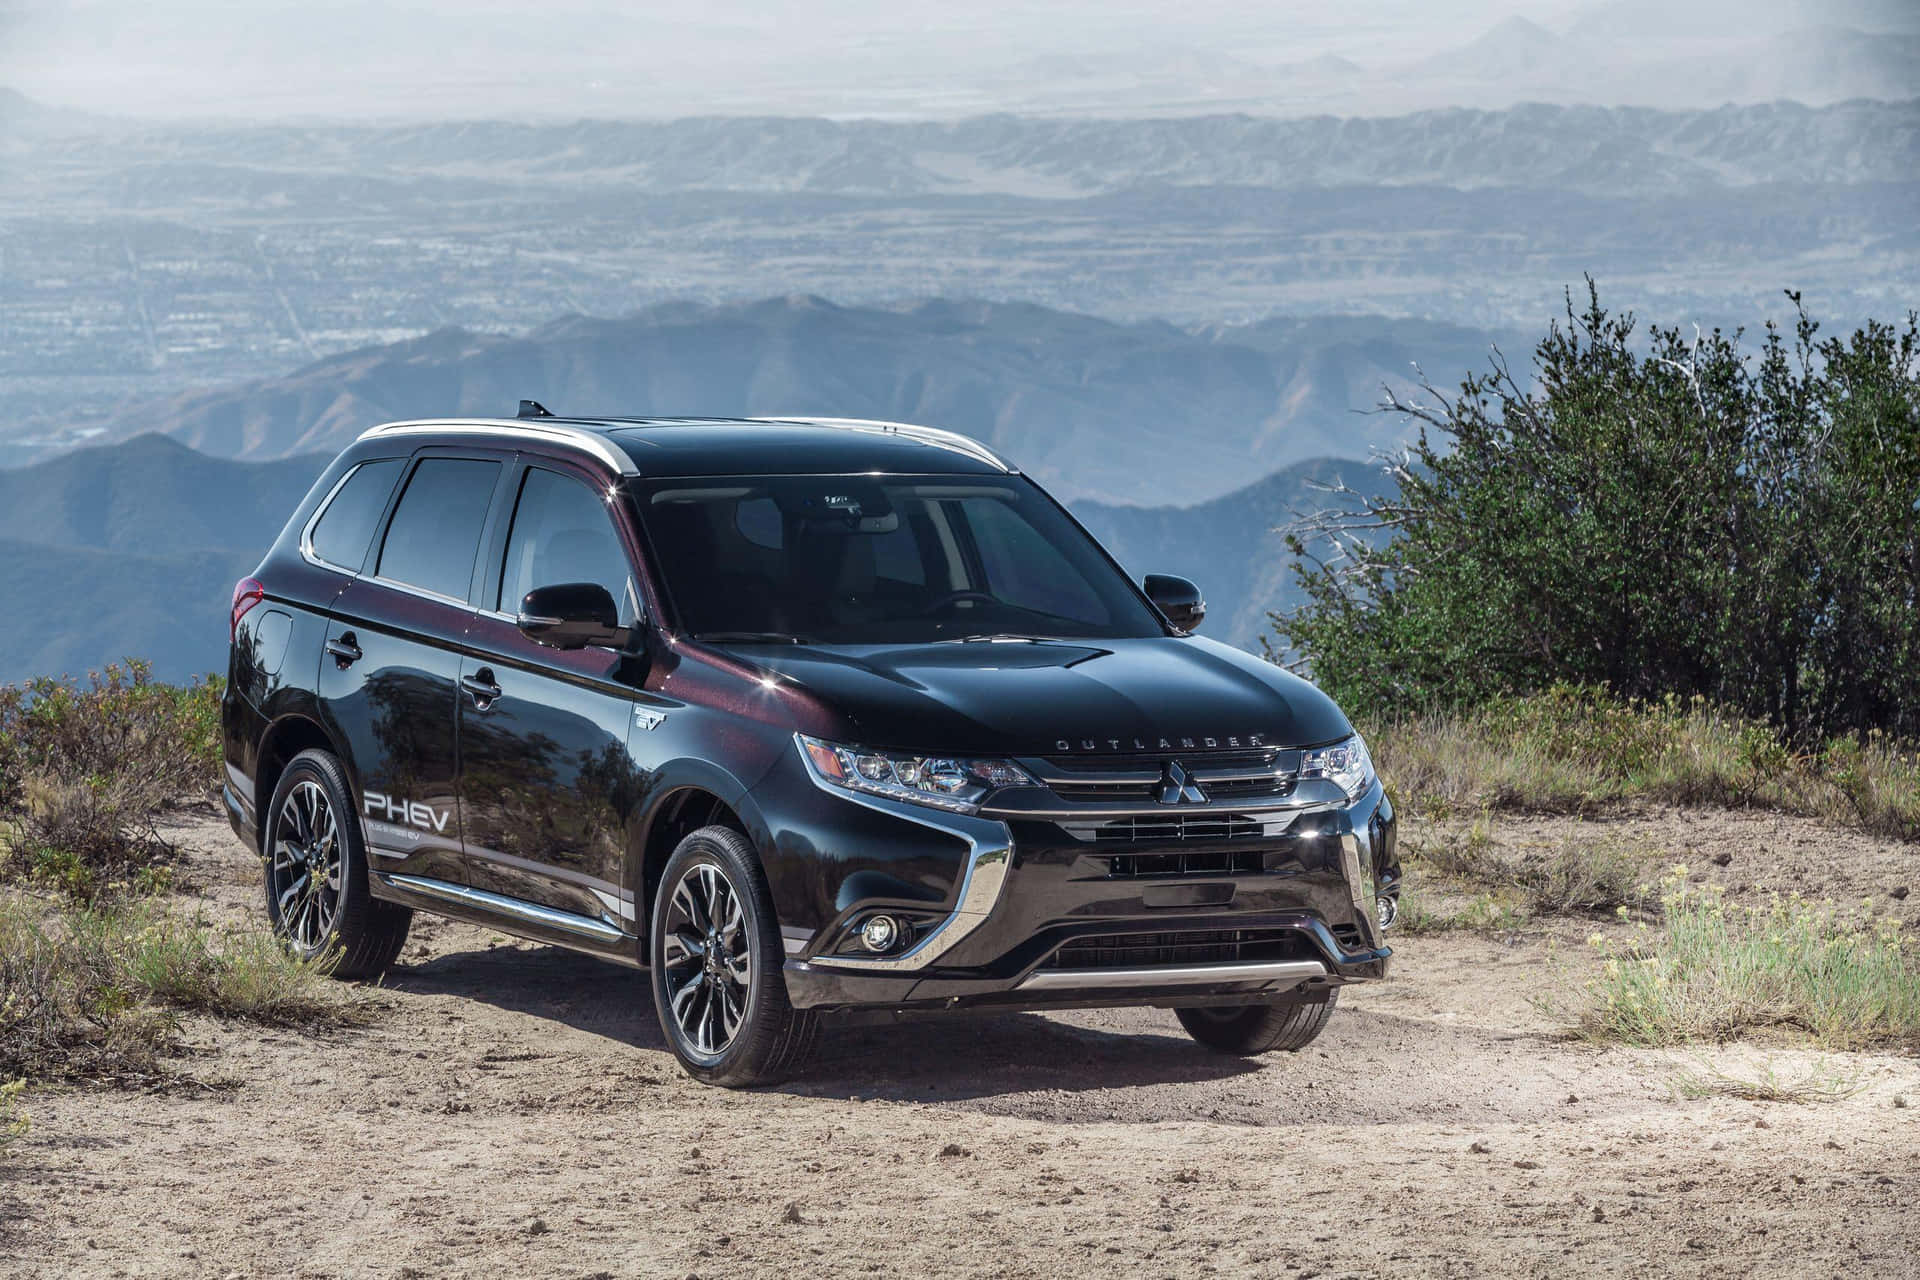 Stunning Off-road Adventure With The Mitsubishi Outlander Wallpaper